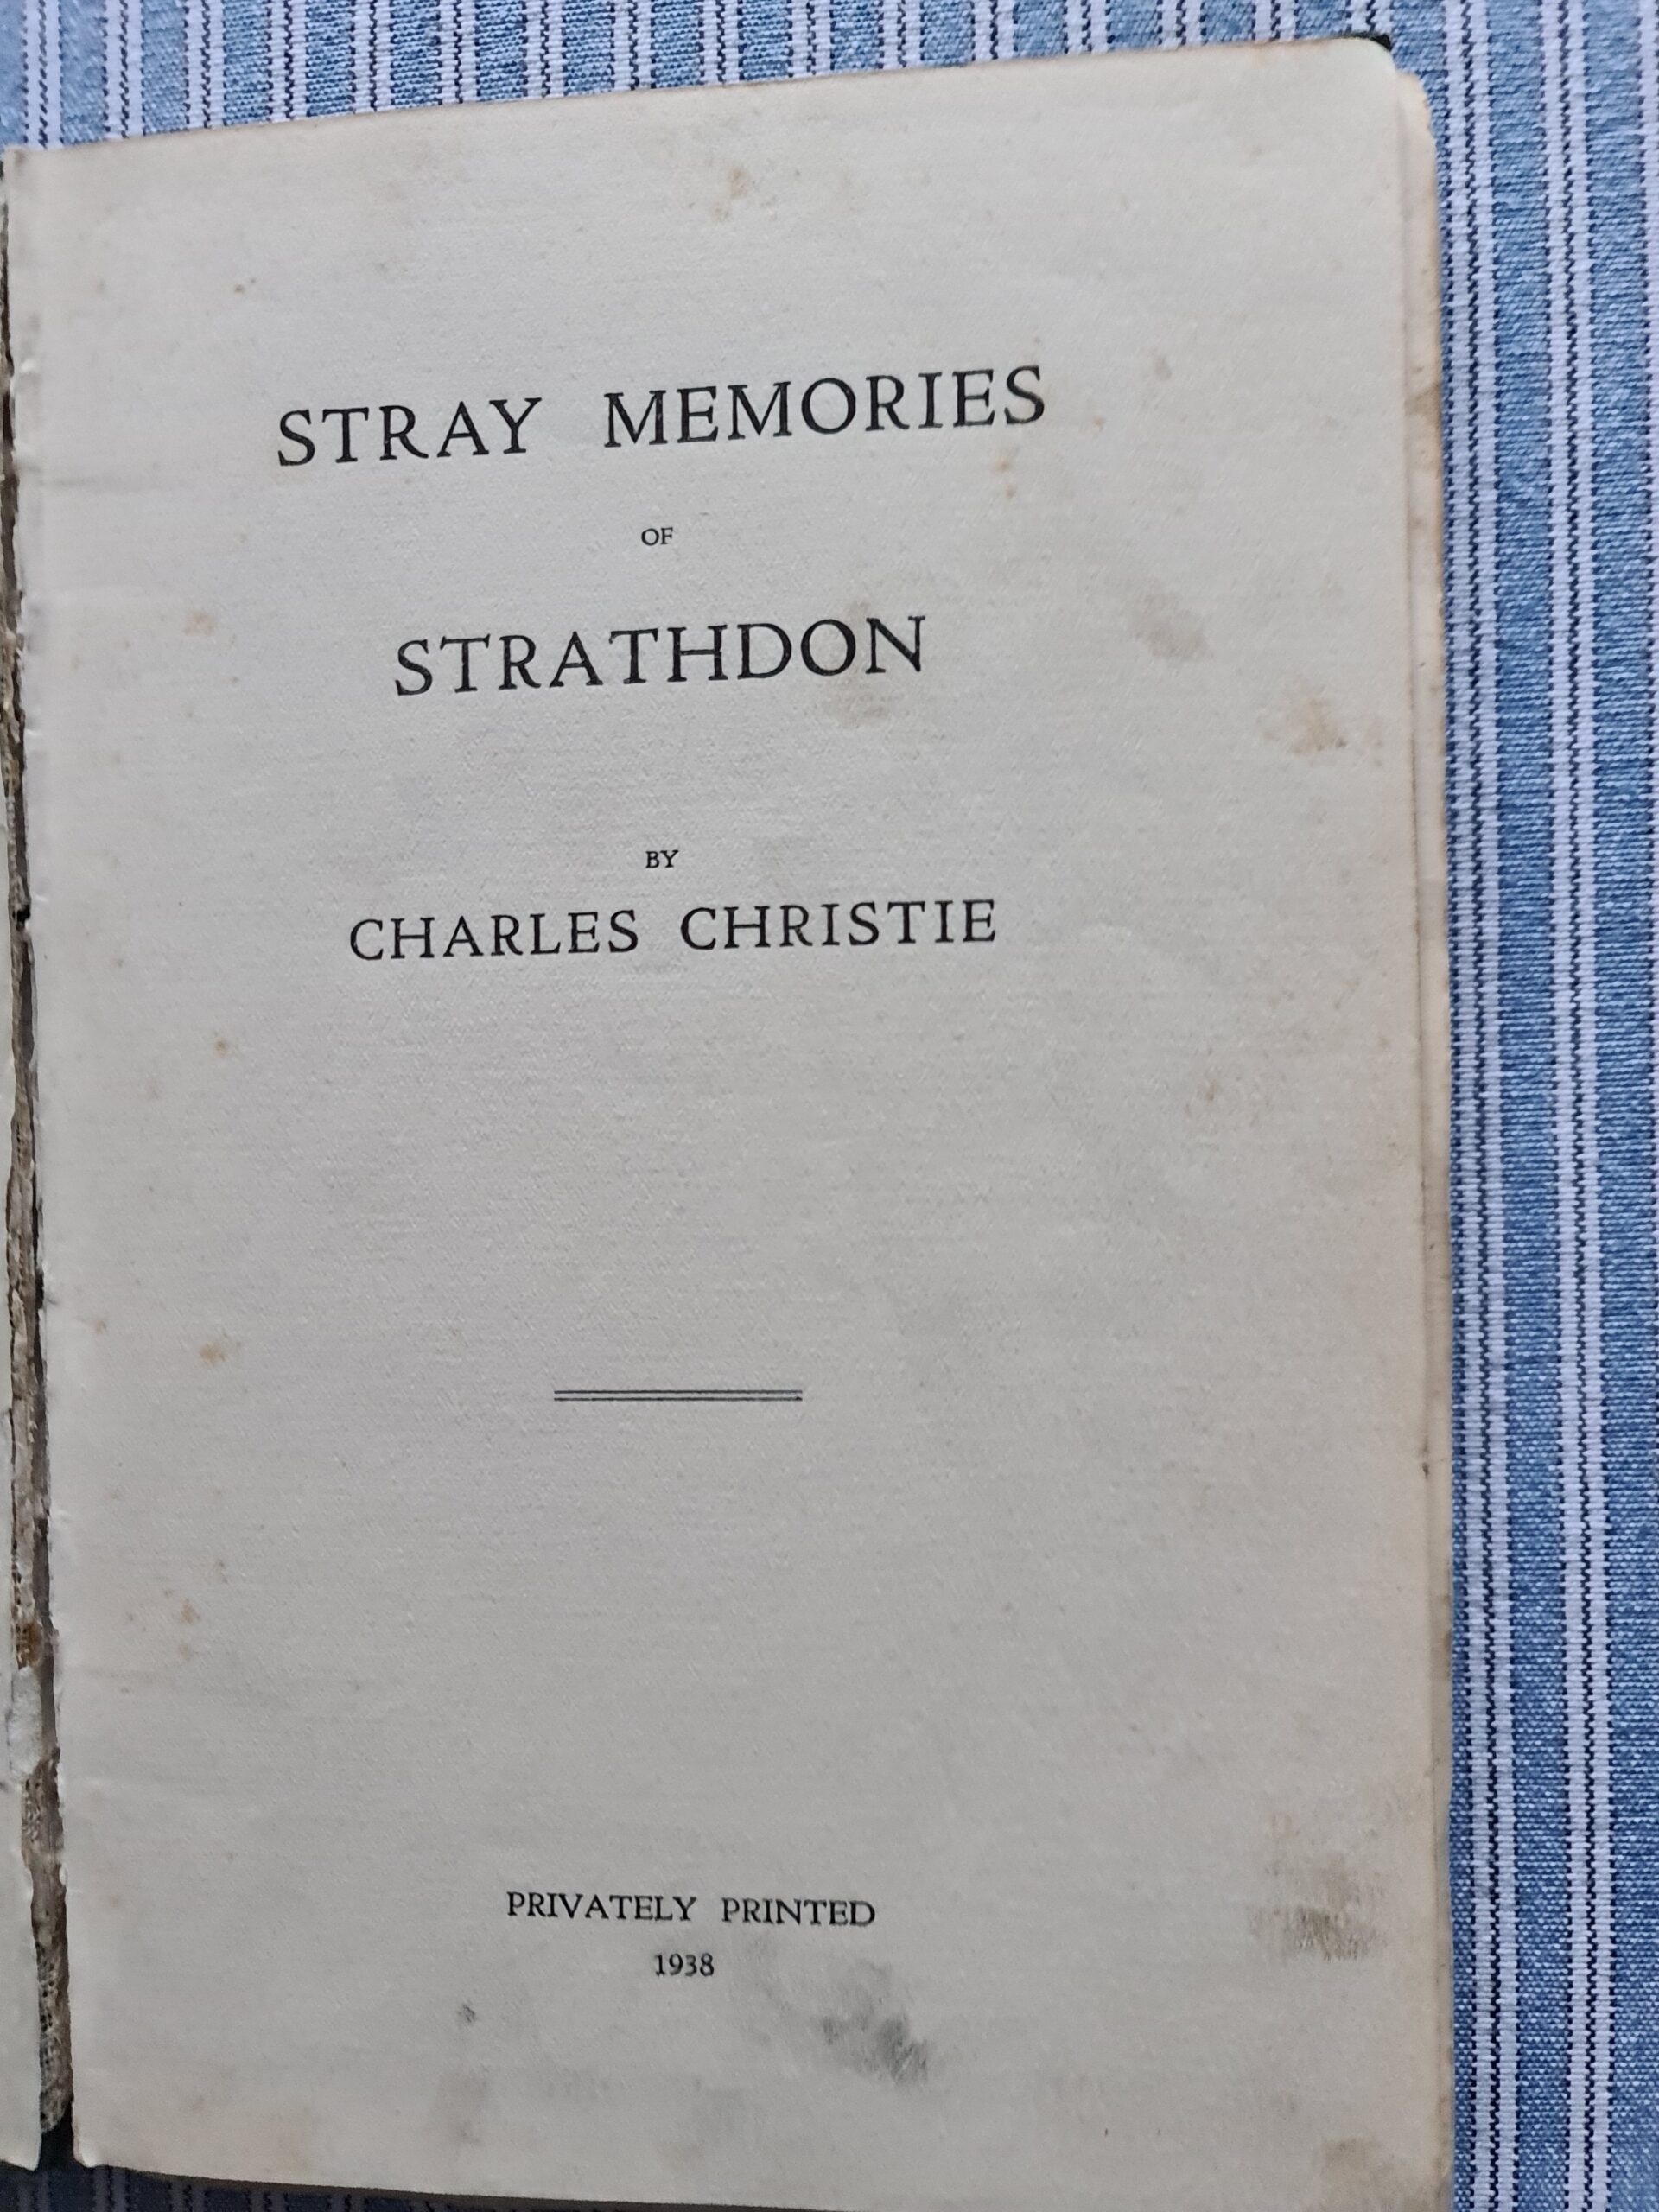 Stray Memories of Strathdon by Charles Christie (1938)